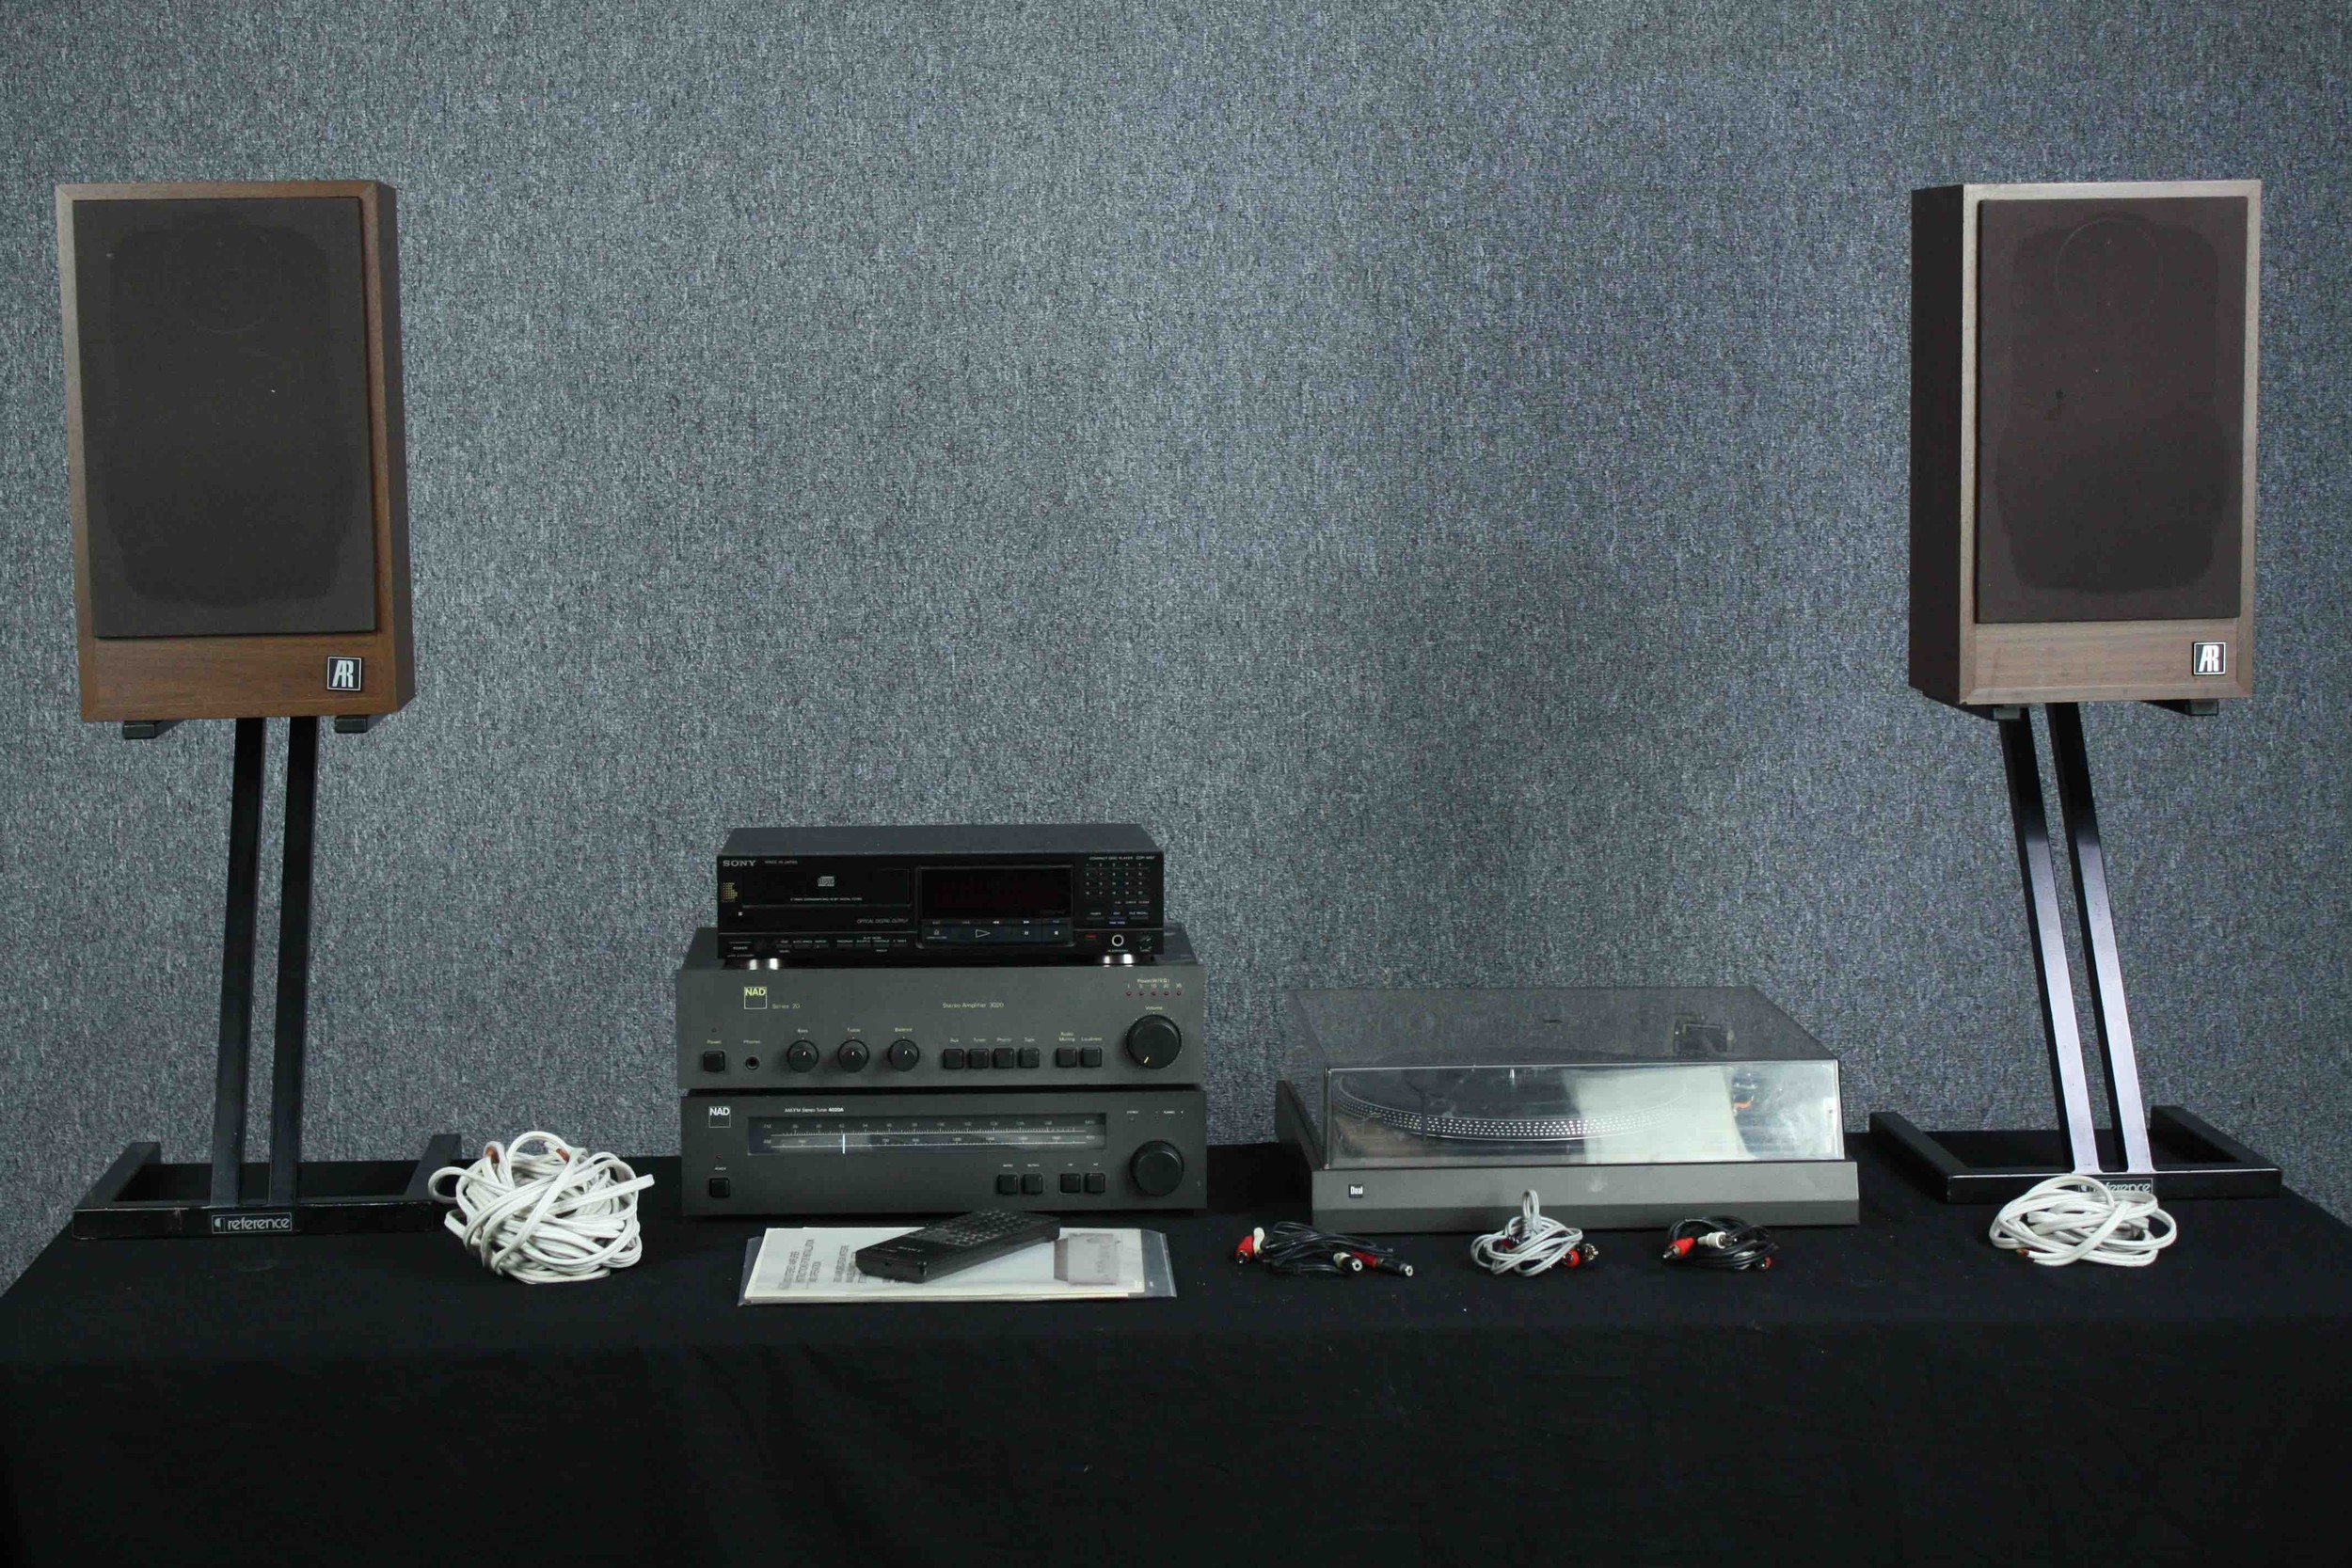 Hi-Fi stack made up of NAD amplifier and tuner. Dual turntable. A&R speakers. The woofer has some